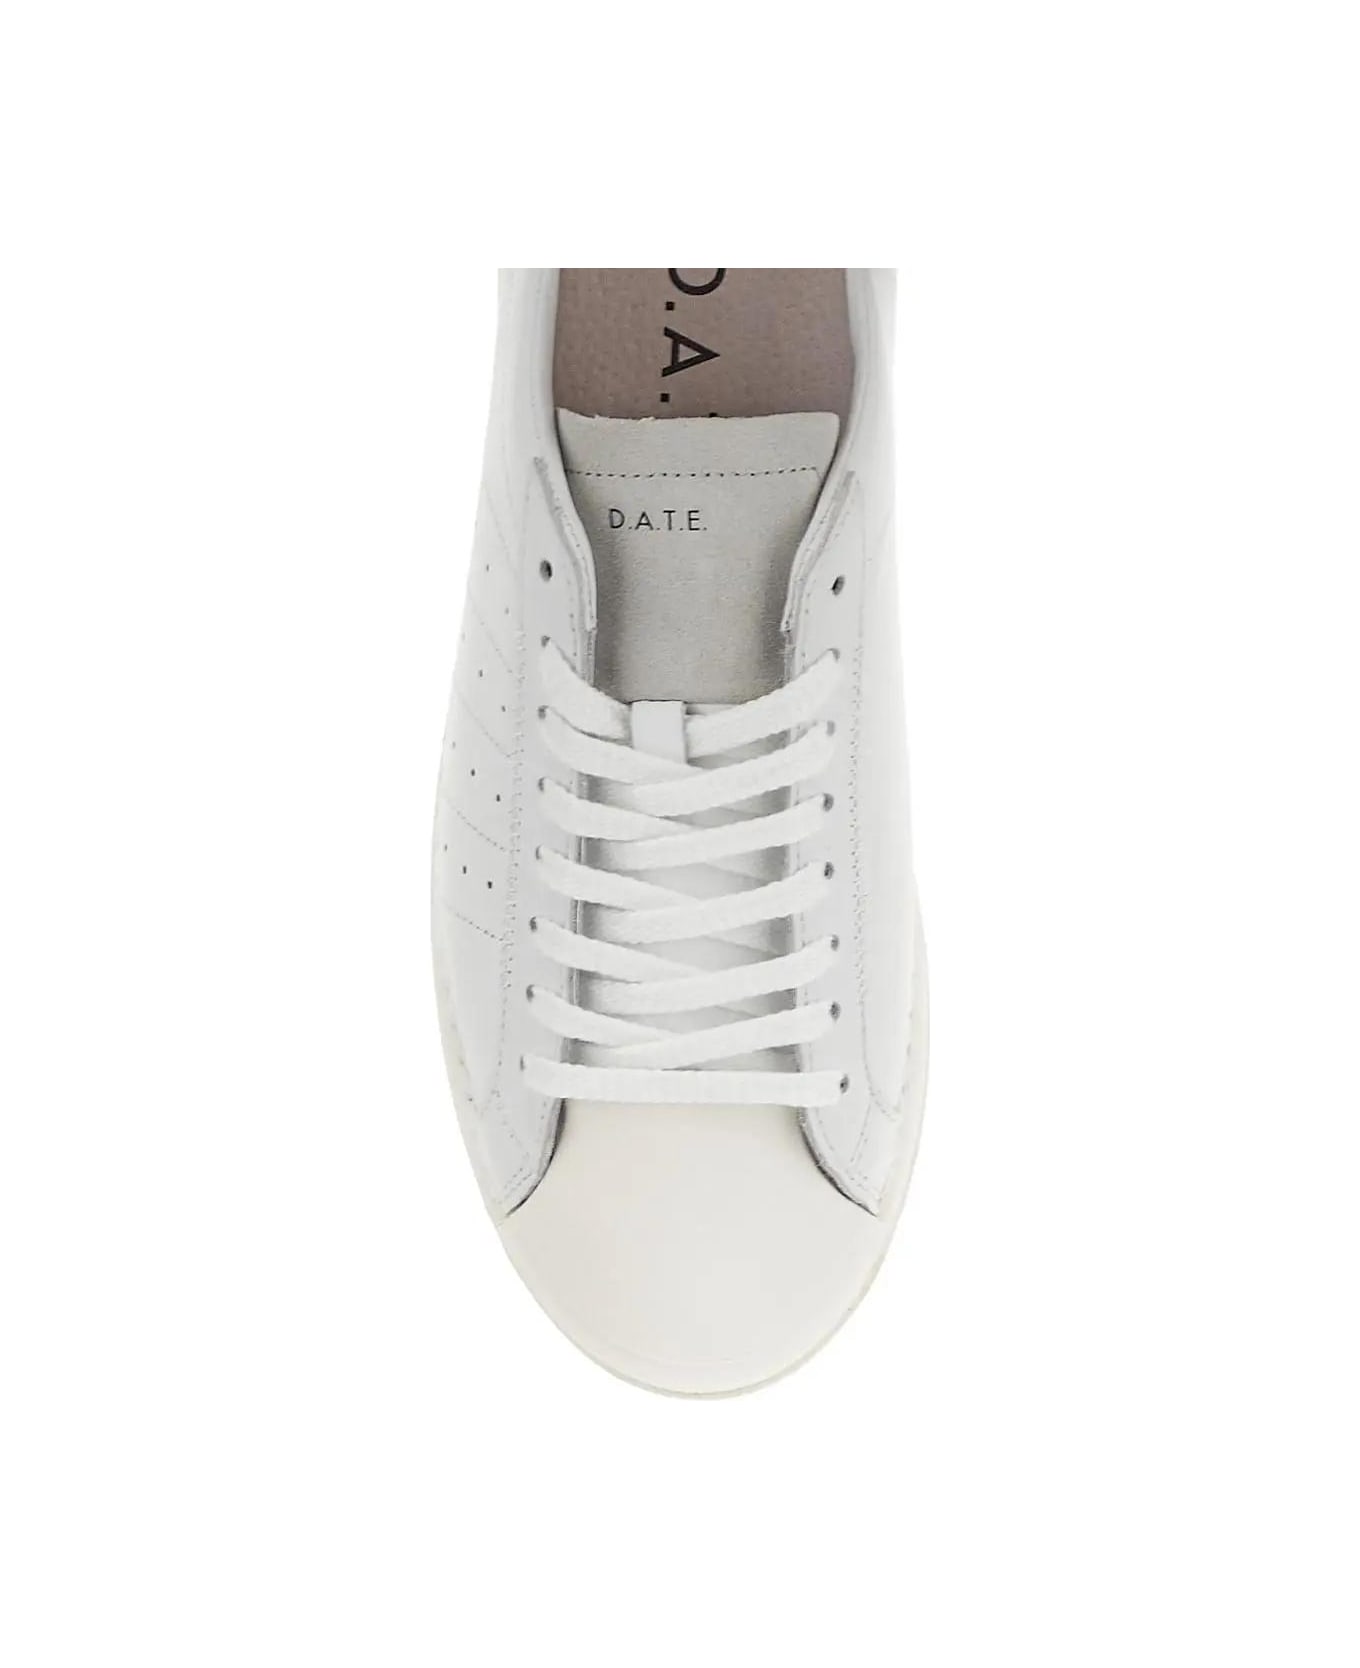 D.A.T.E. Leather Sneakers - Bianco / Blu